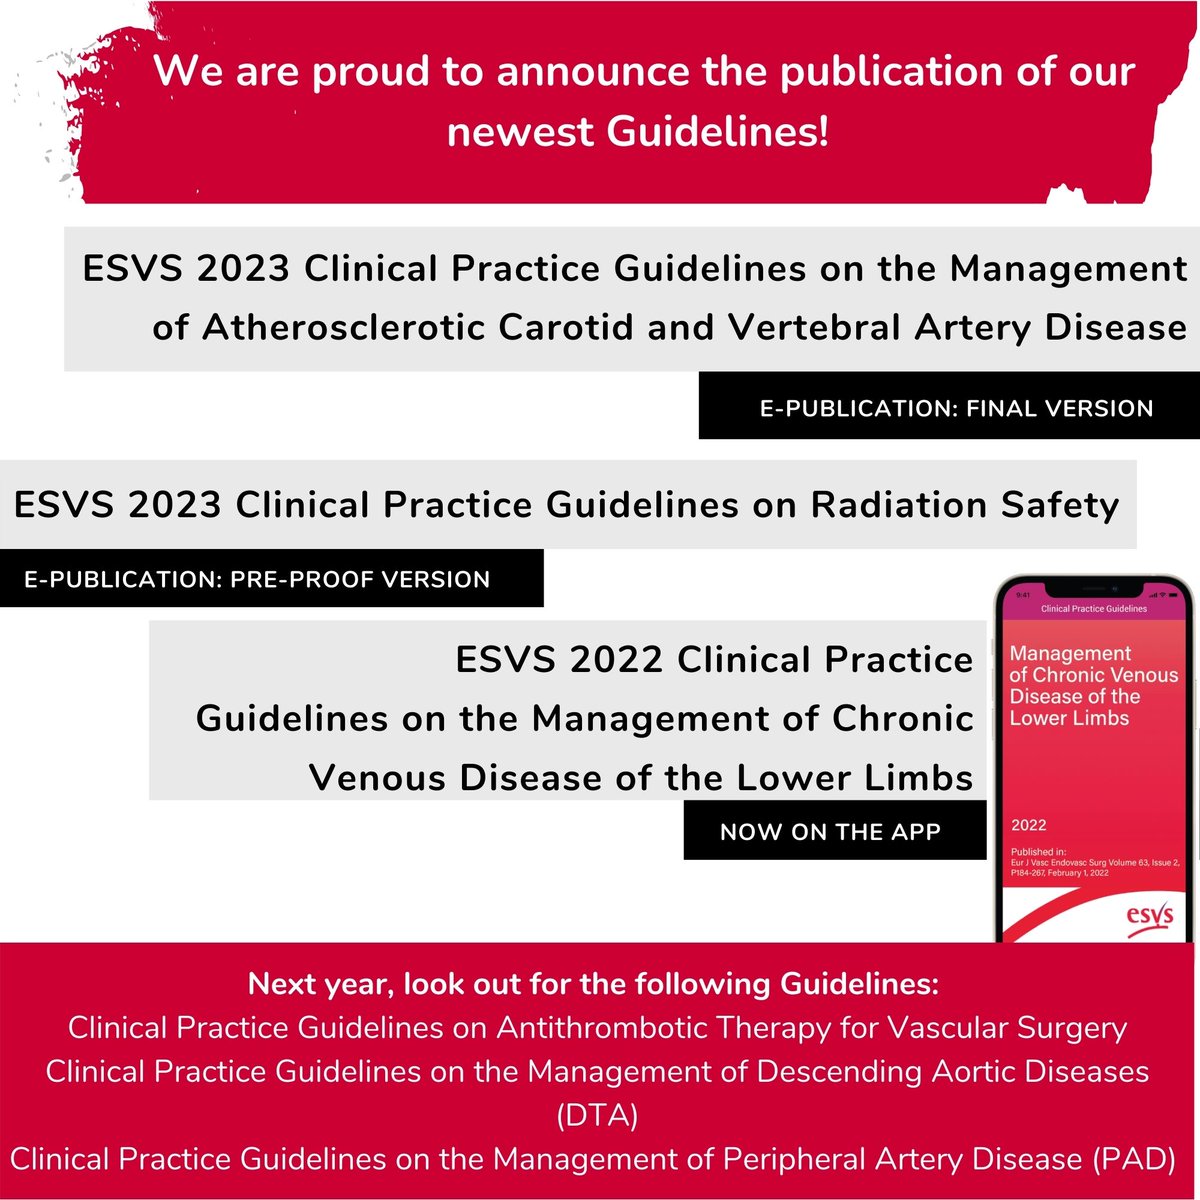 Have you noticed yet? We have released new Guidelines on the app and as e-publications! Find out more here: esvs.org/guidelines